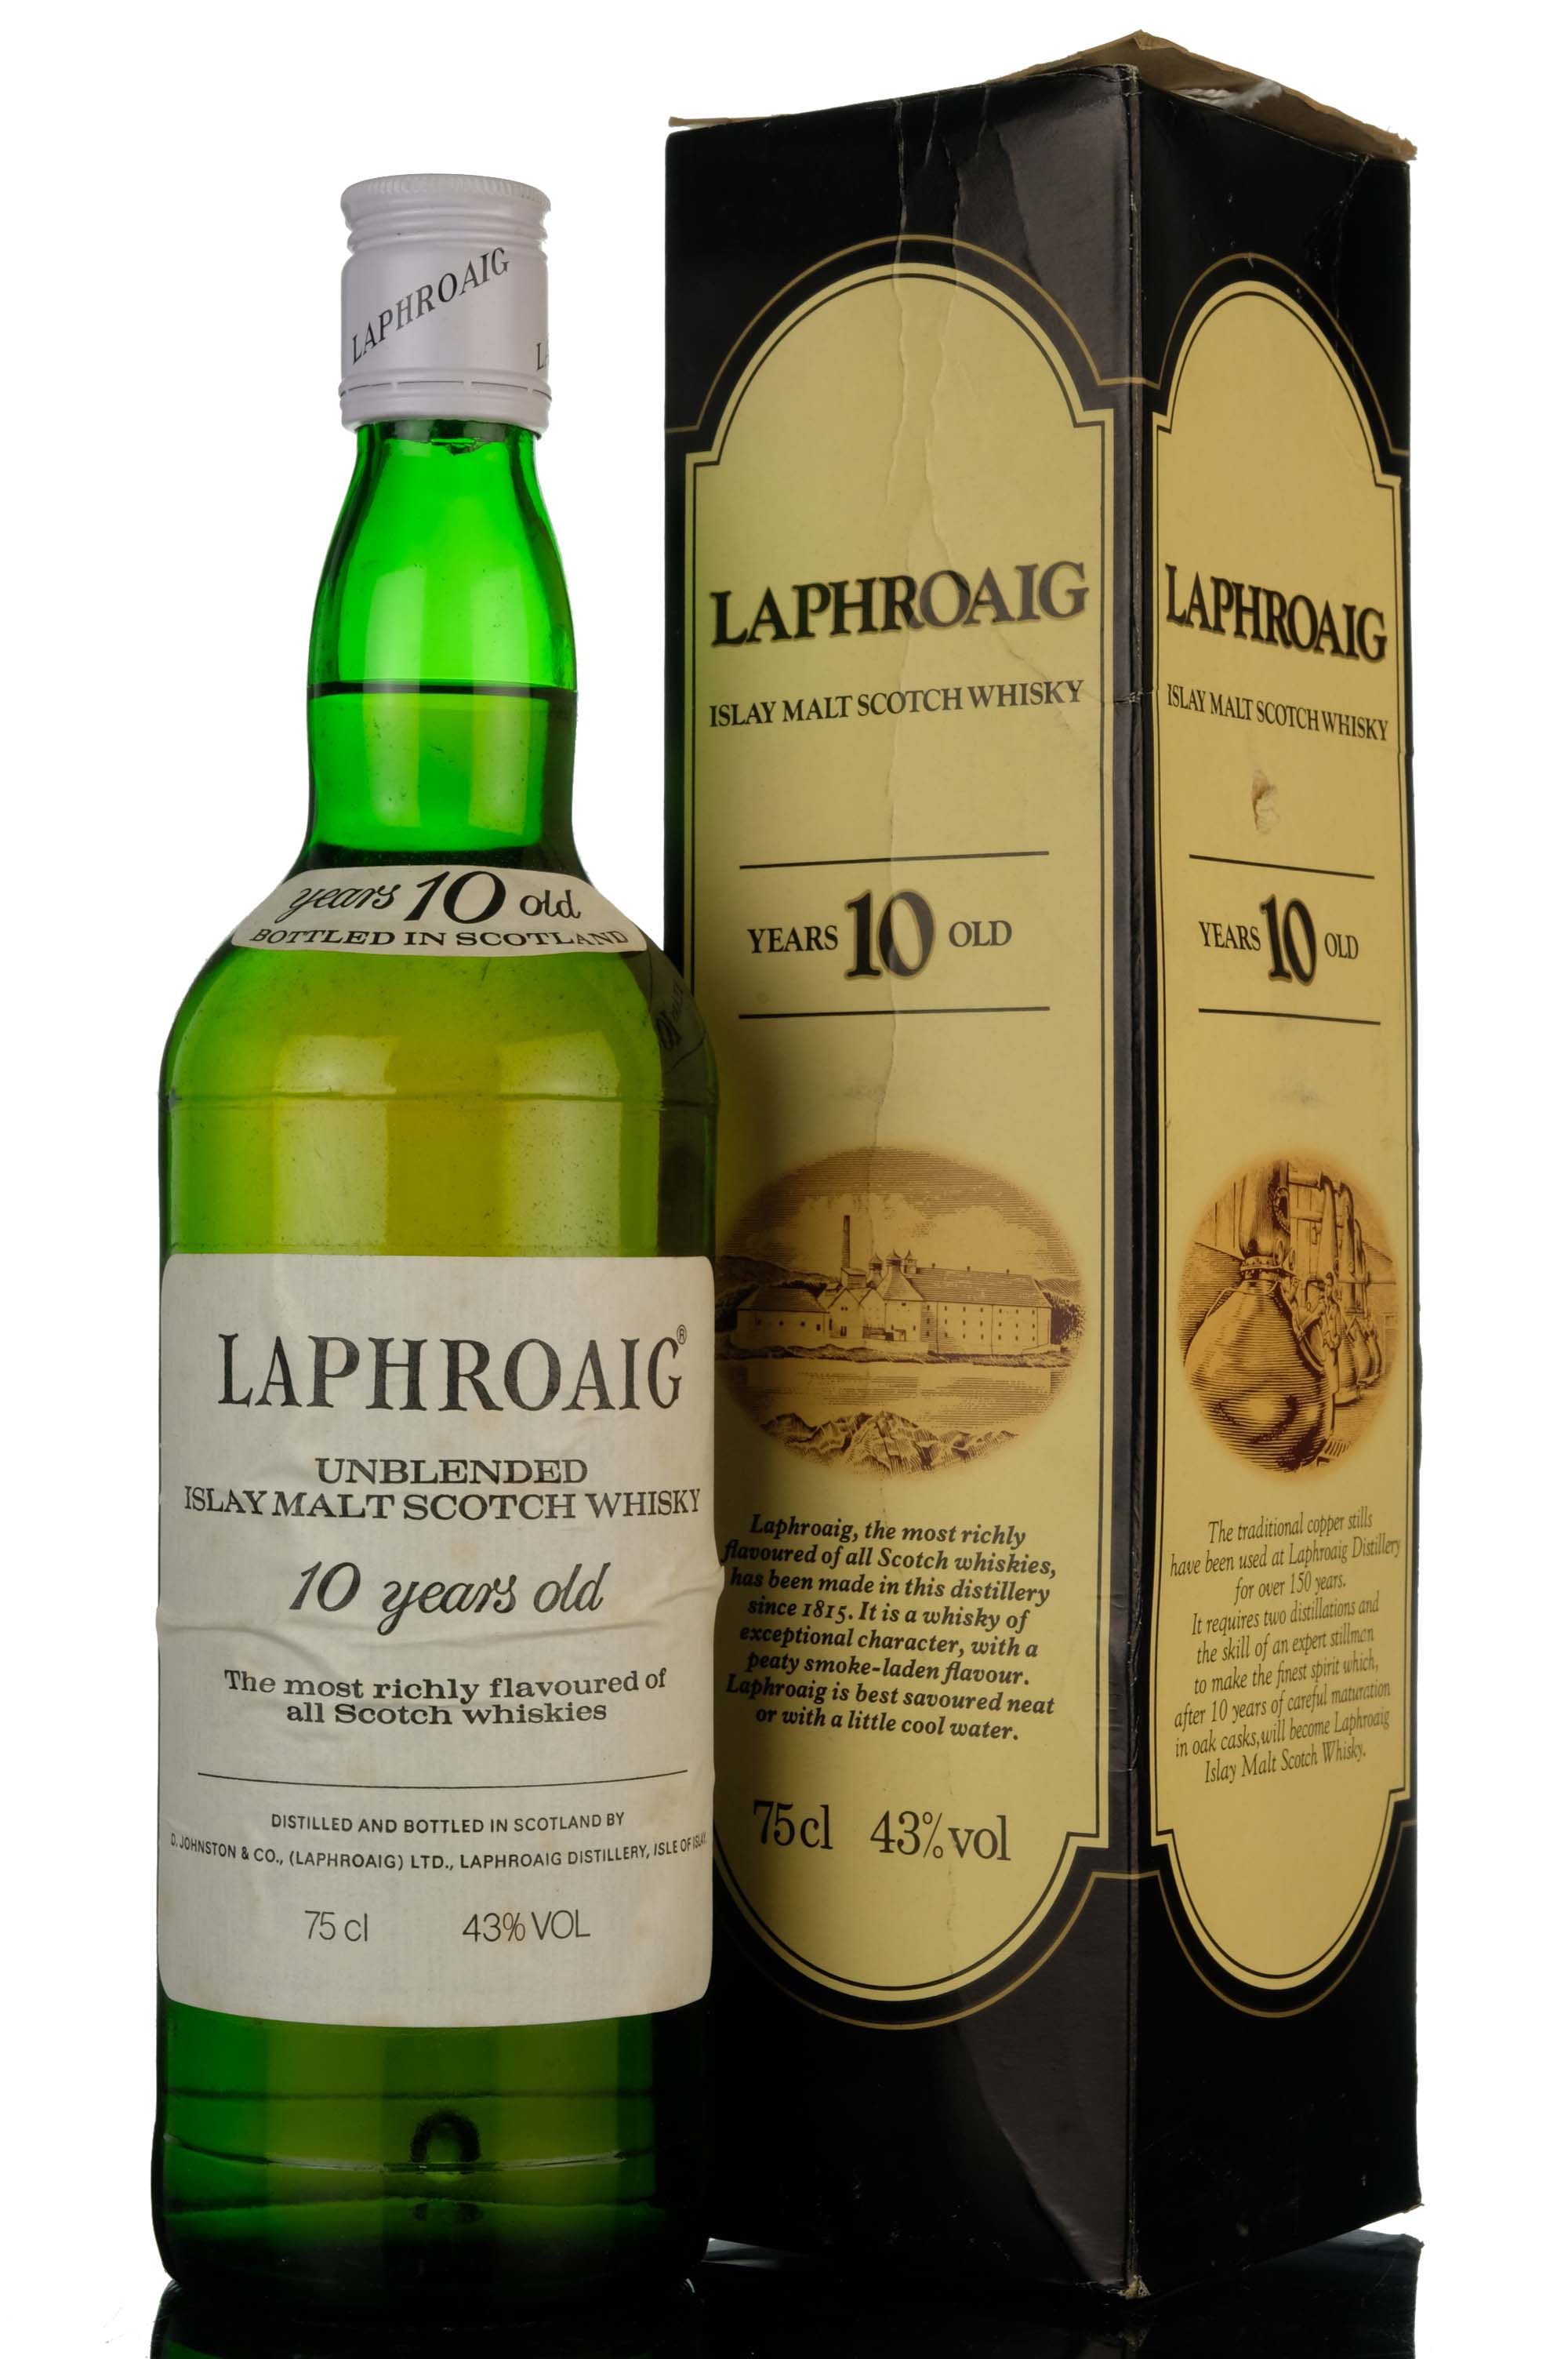 Laphroaig 10 Year Old - Unblended - 1981 Release